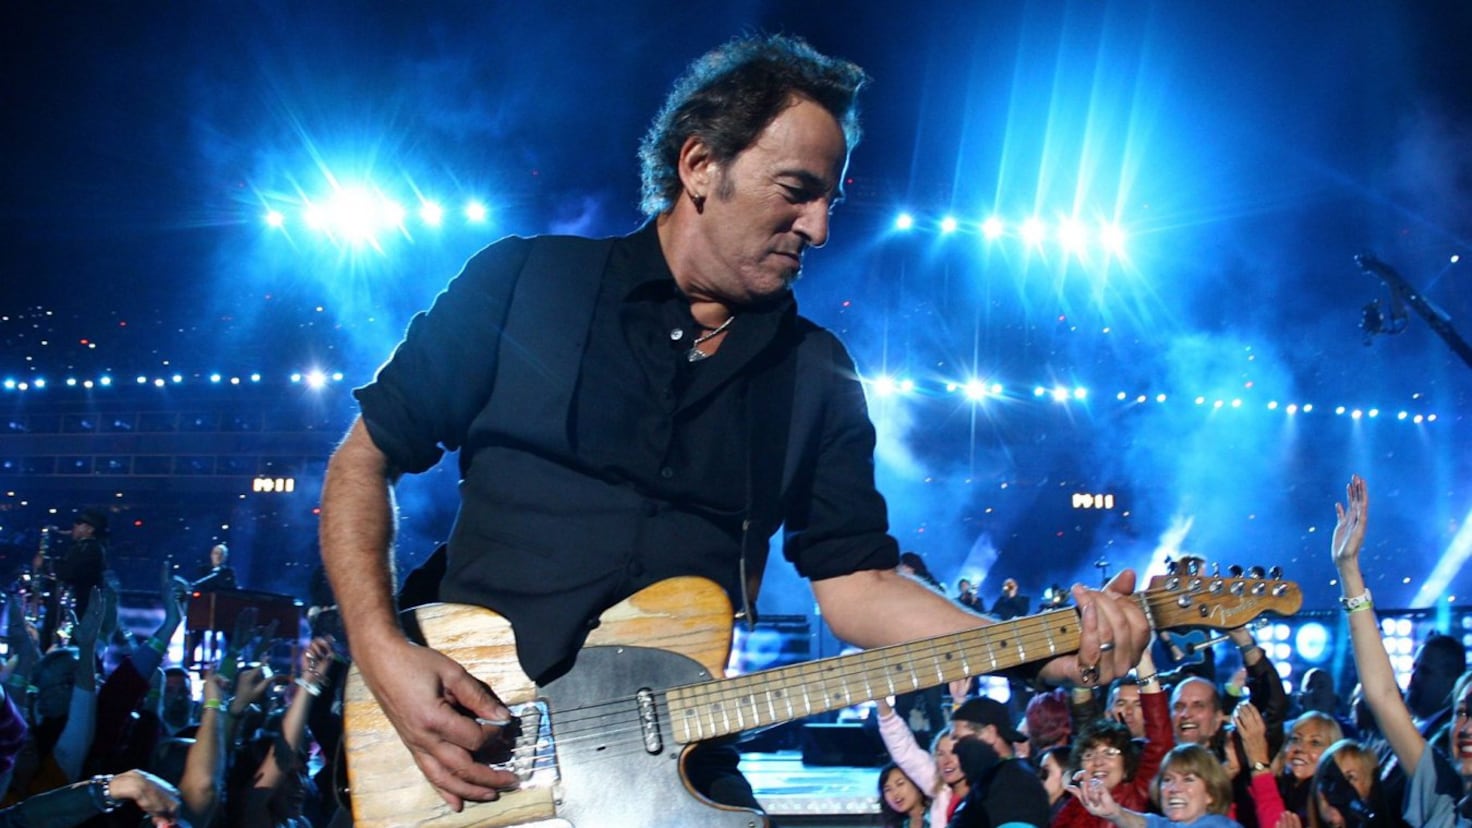 Bruce Springsteen concerts in Madrid: dates, days, times and traffic cuts
